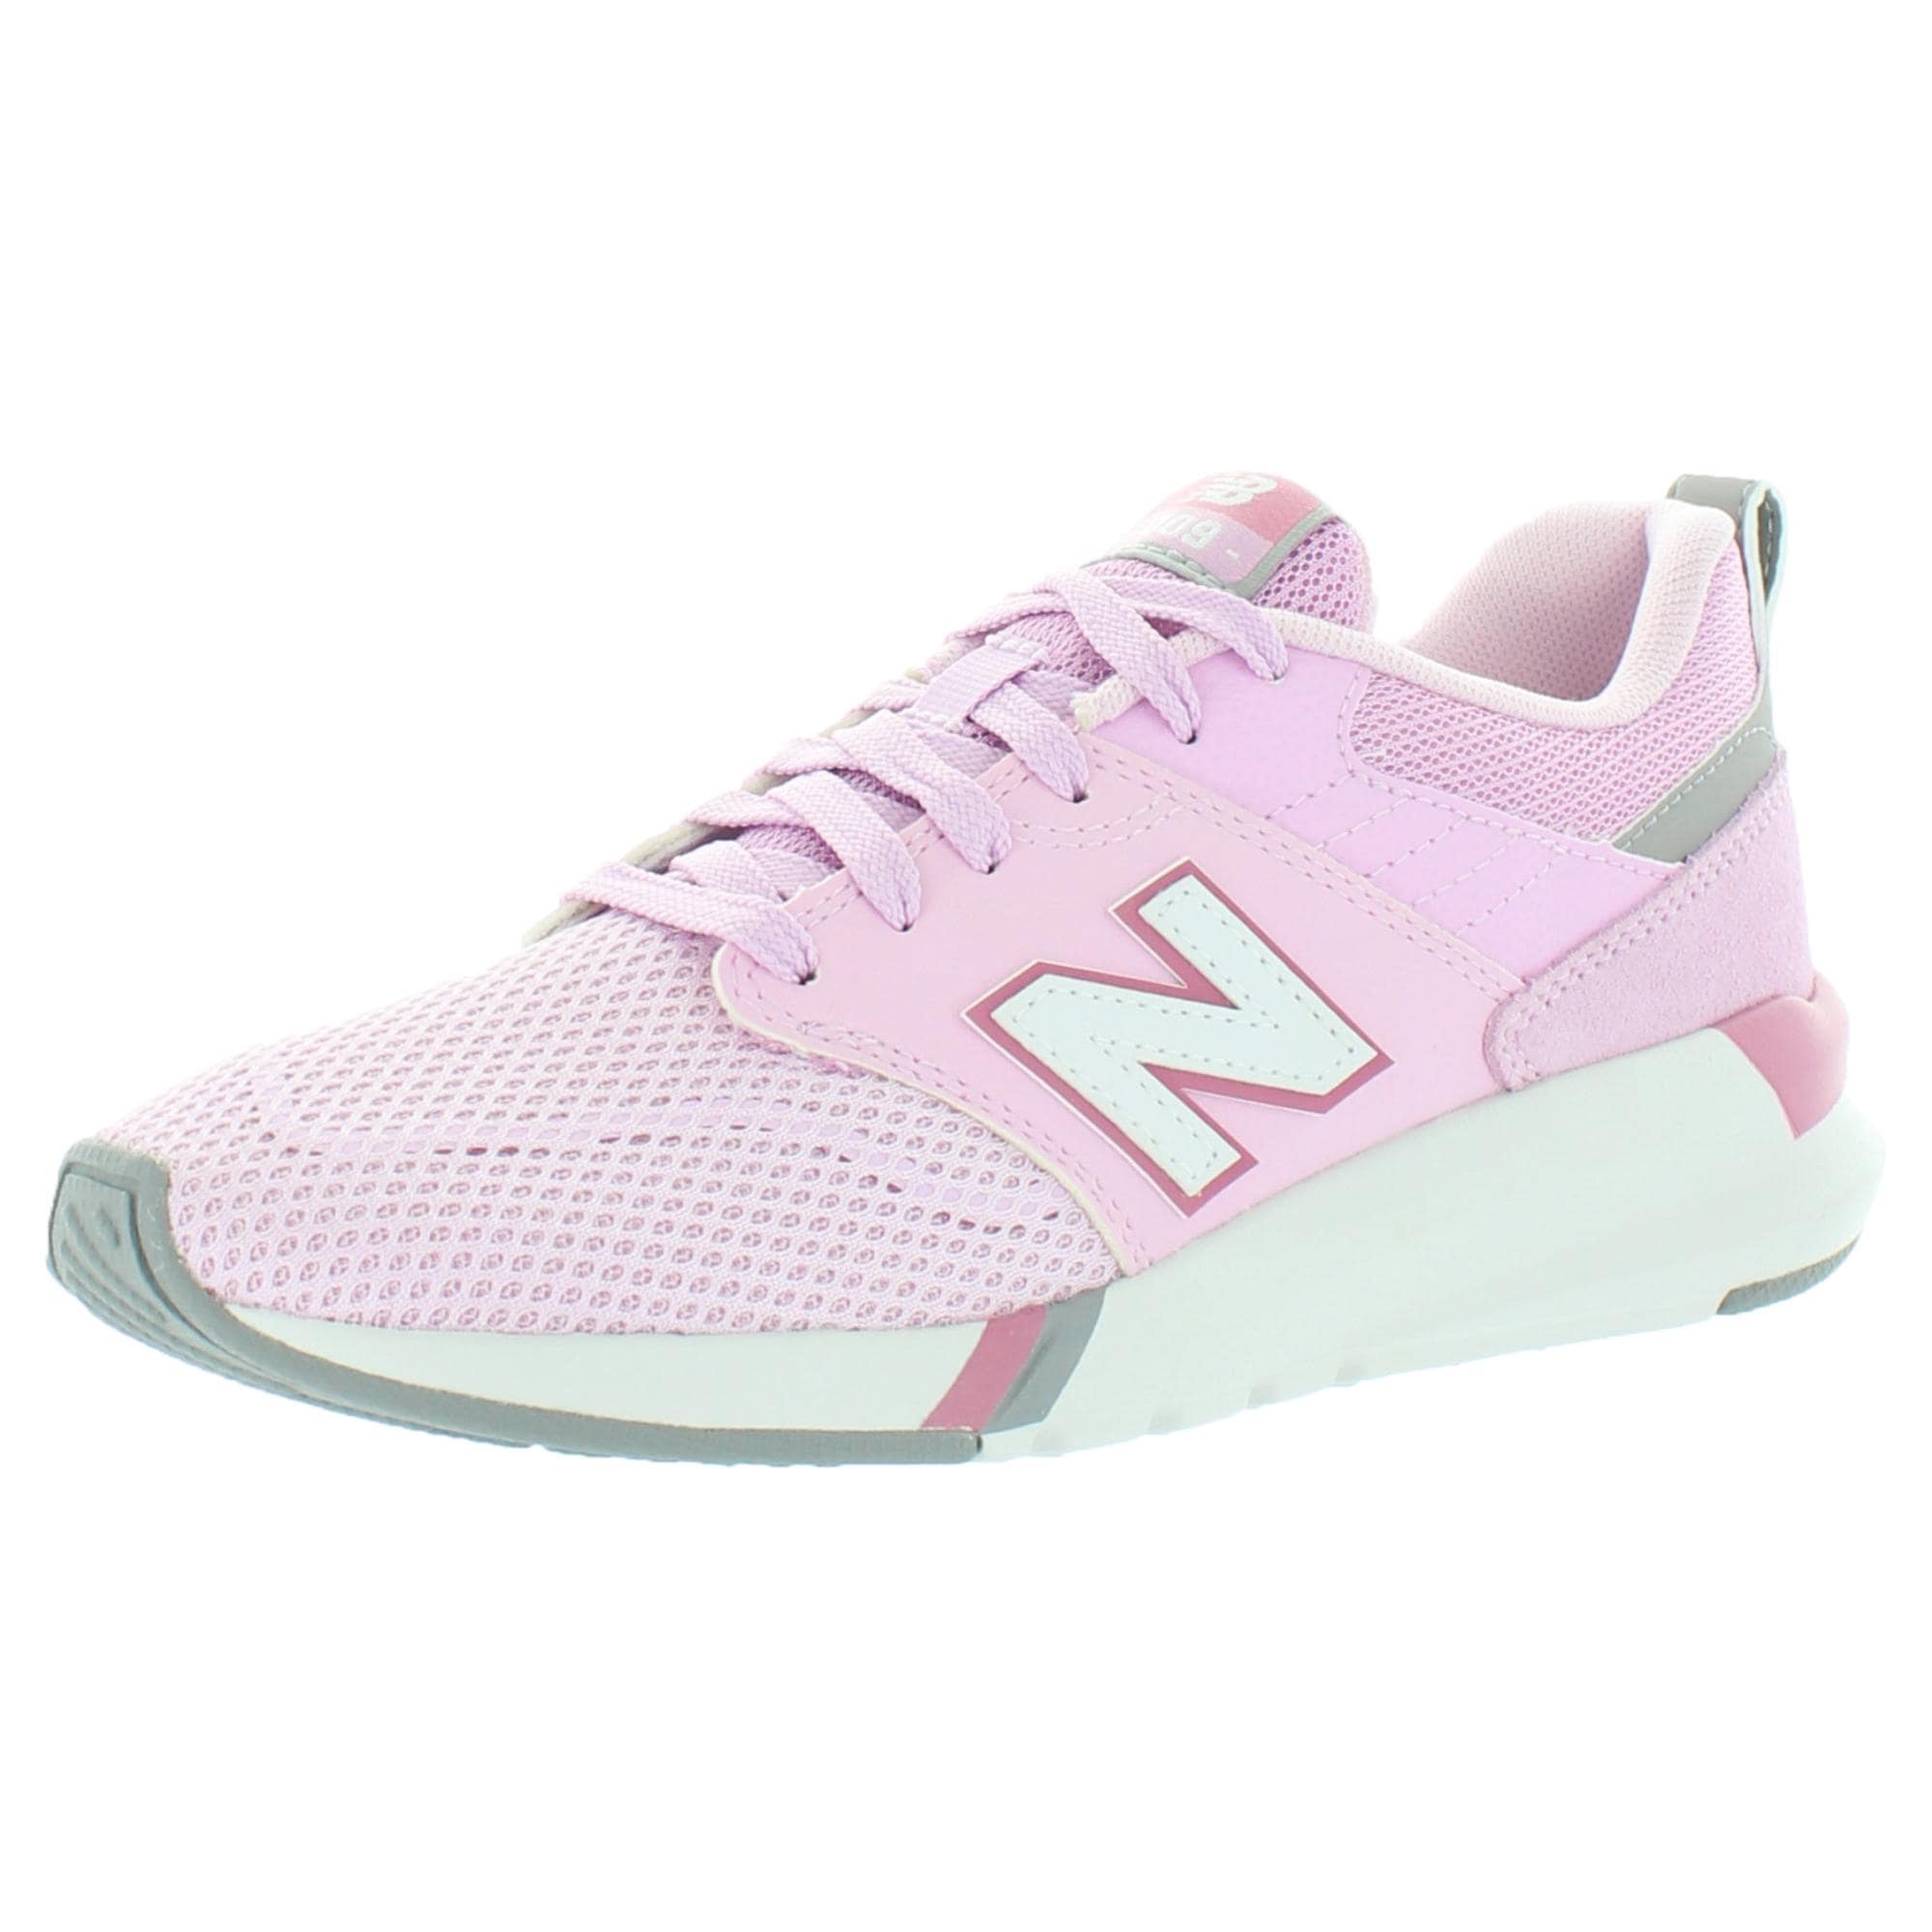 pink and gray new balance shoes